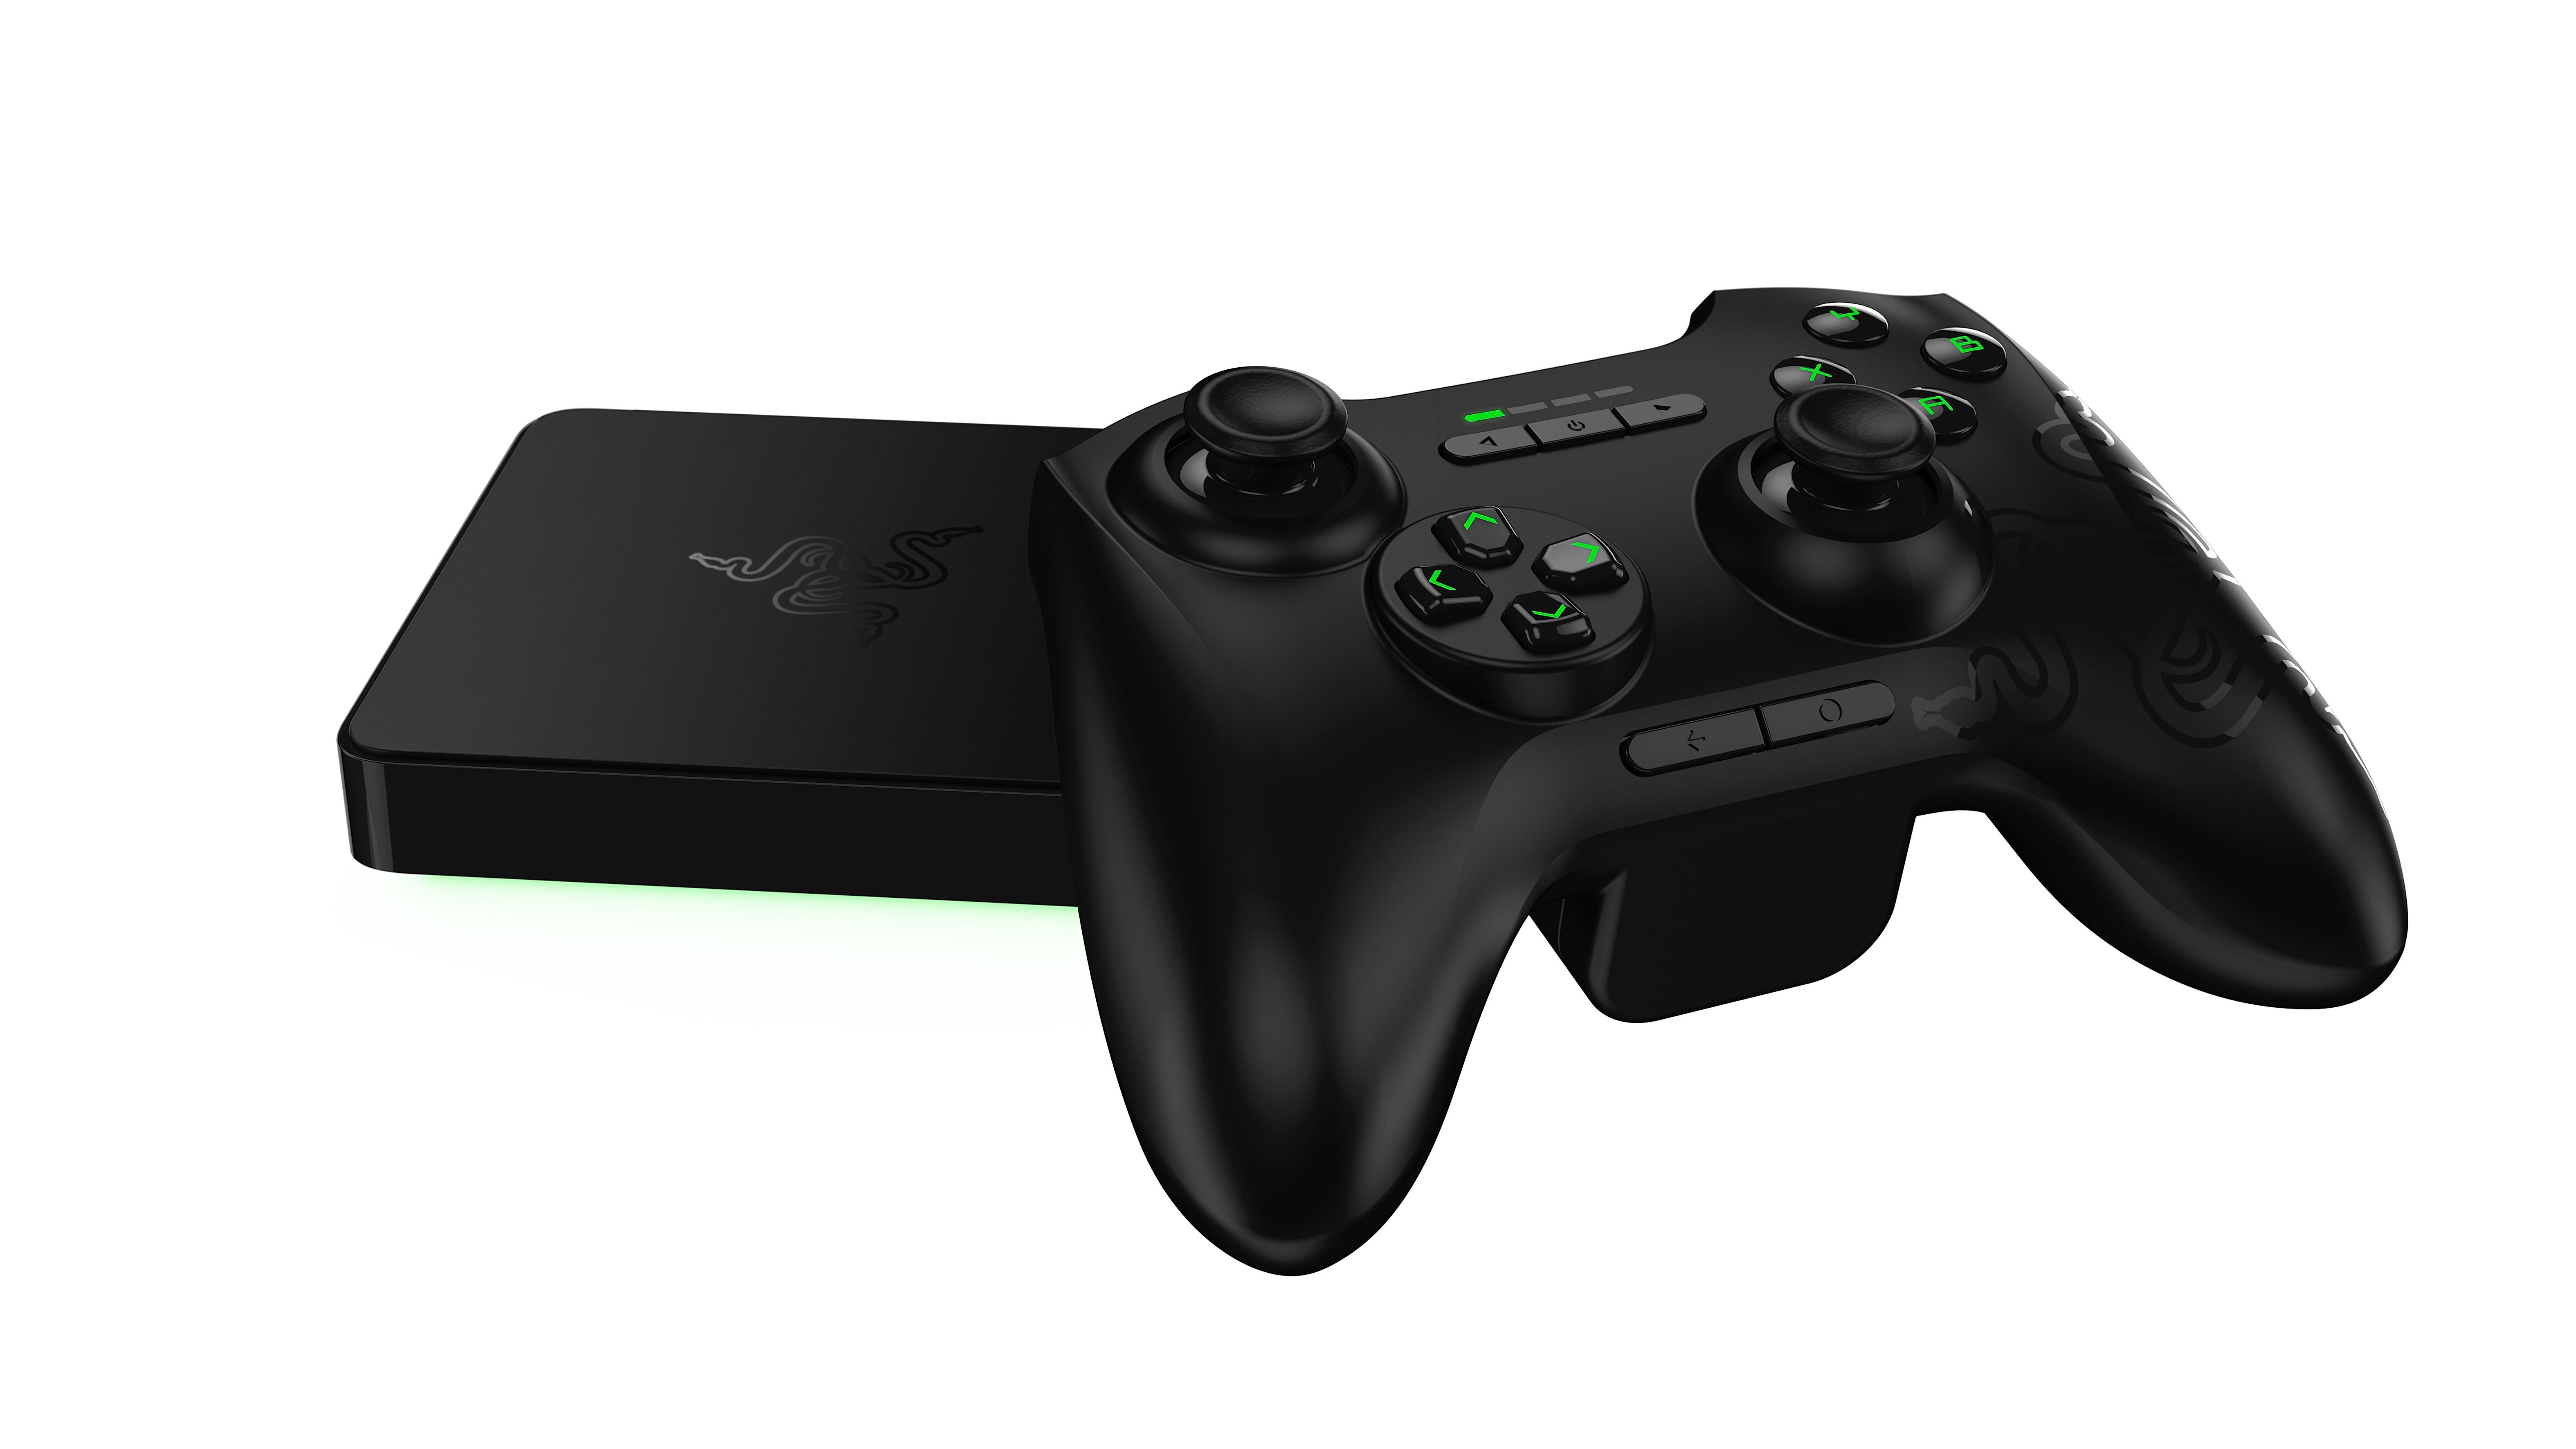 The Razer Forge TV and controller.